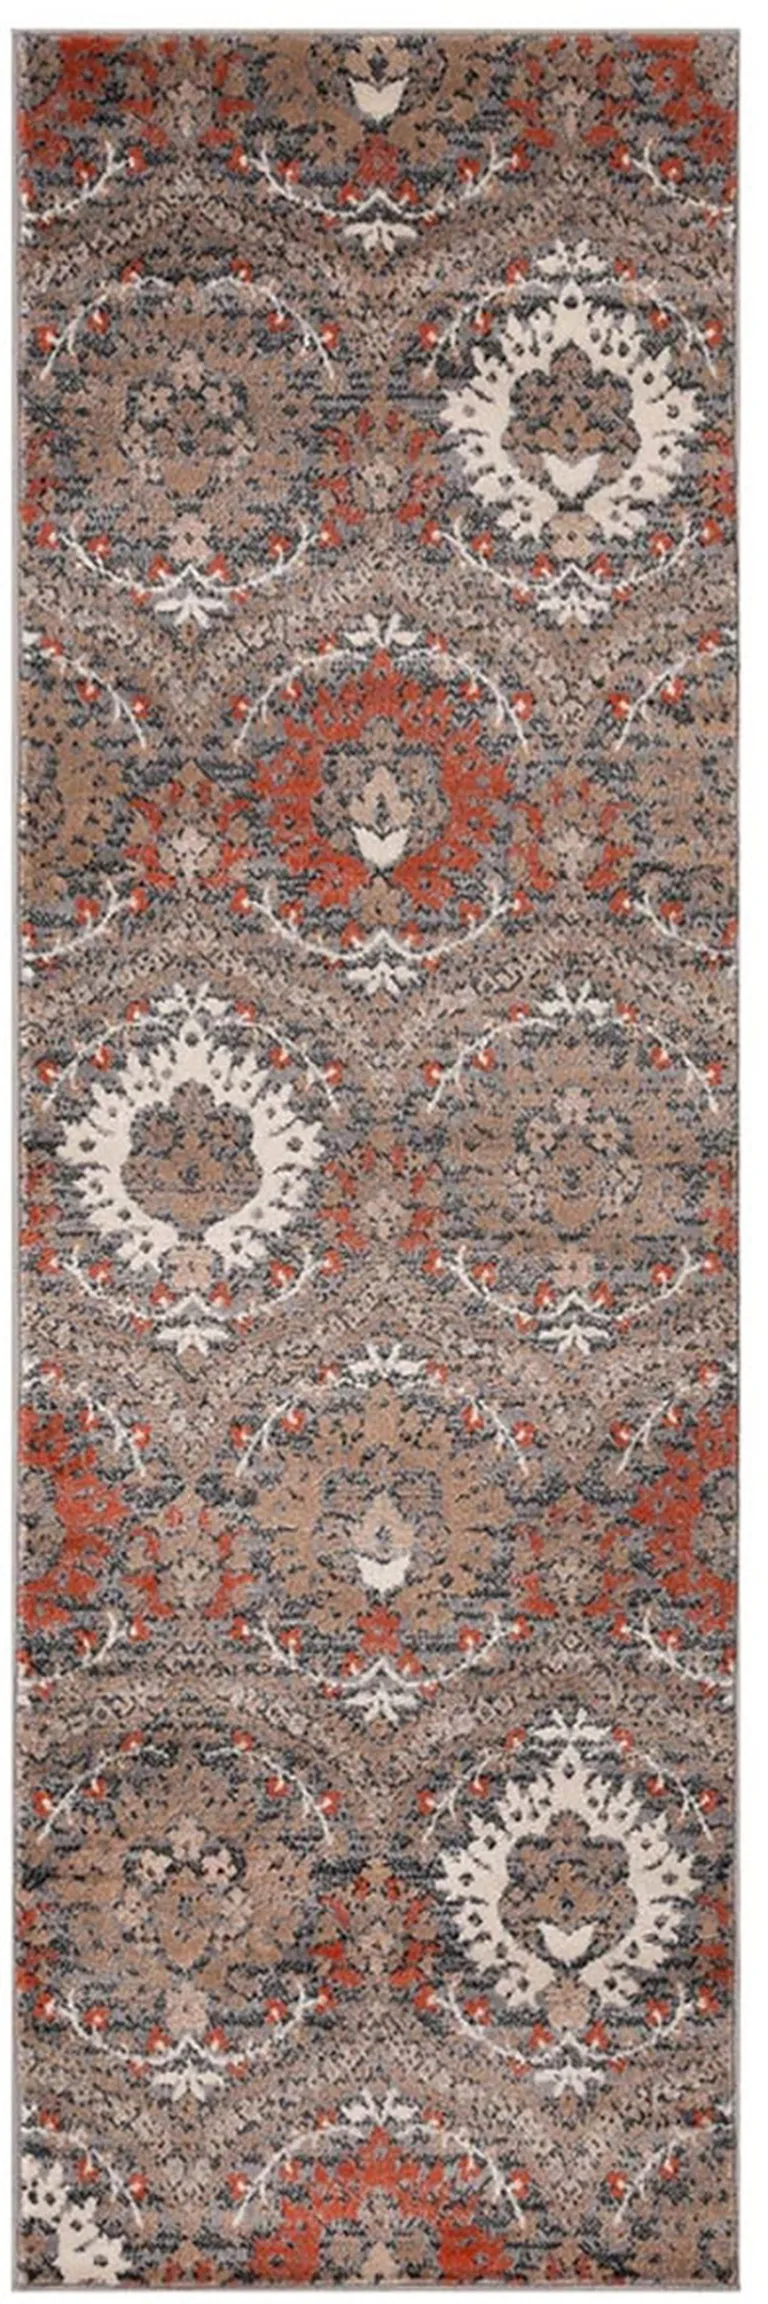 10' Rust And Gray Floral Stain Resistant Runner Rug Photo 1